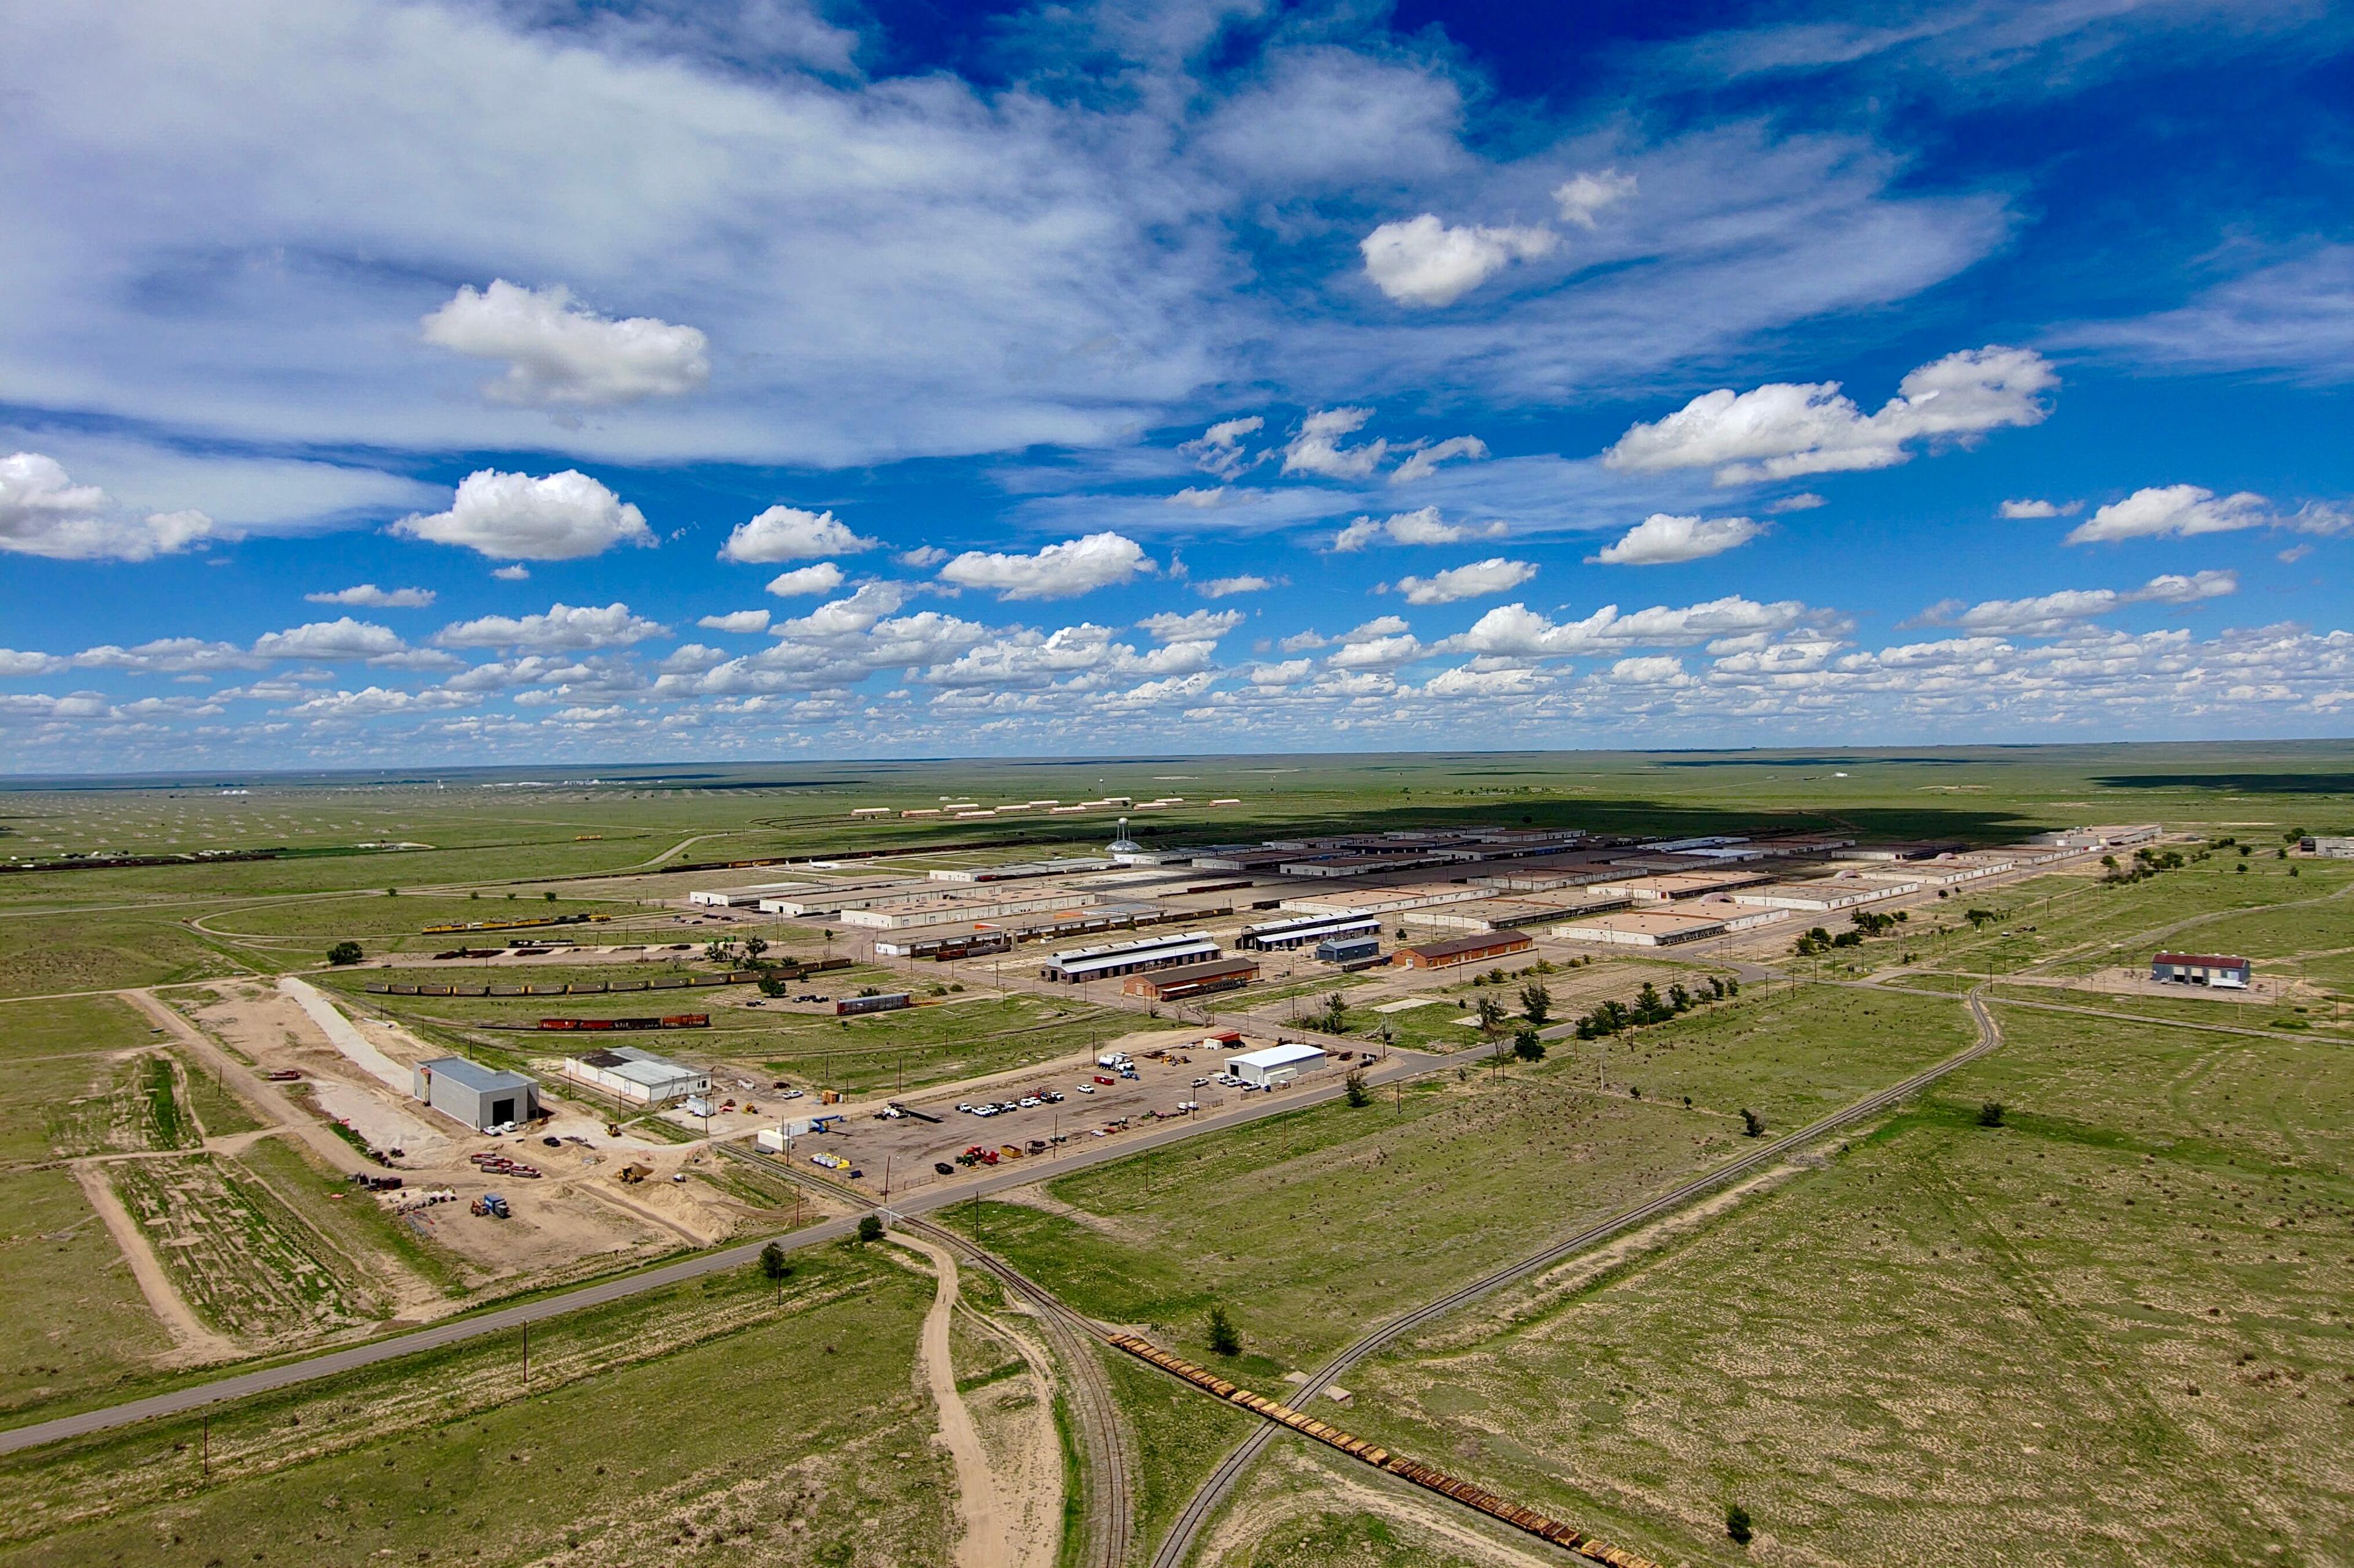 An oblique aerial view of part of PuebloPlex showing a flat landscape with sparse green vegetation and several dozen long low industrial, warehouse and storage buildings lined up in rows along with a parking lot at the center of the image. More low buildings can be seen in the distance. Several roads lead into and through the area. The sky is blue with puffy white clouds.